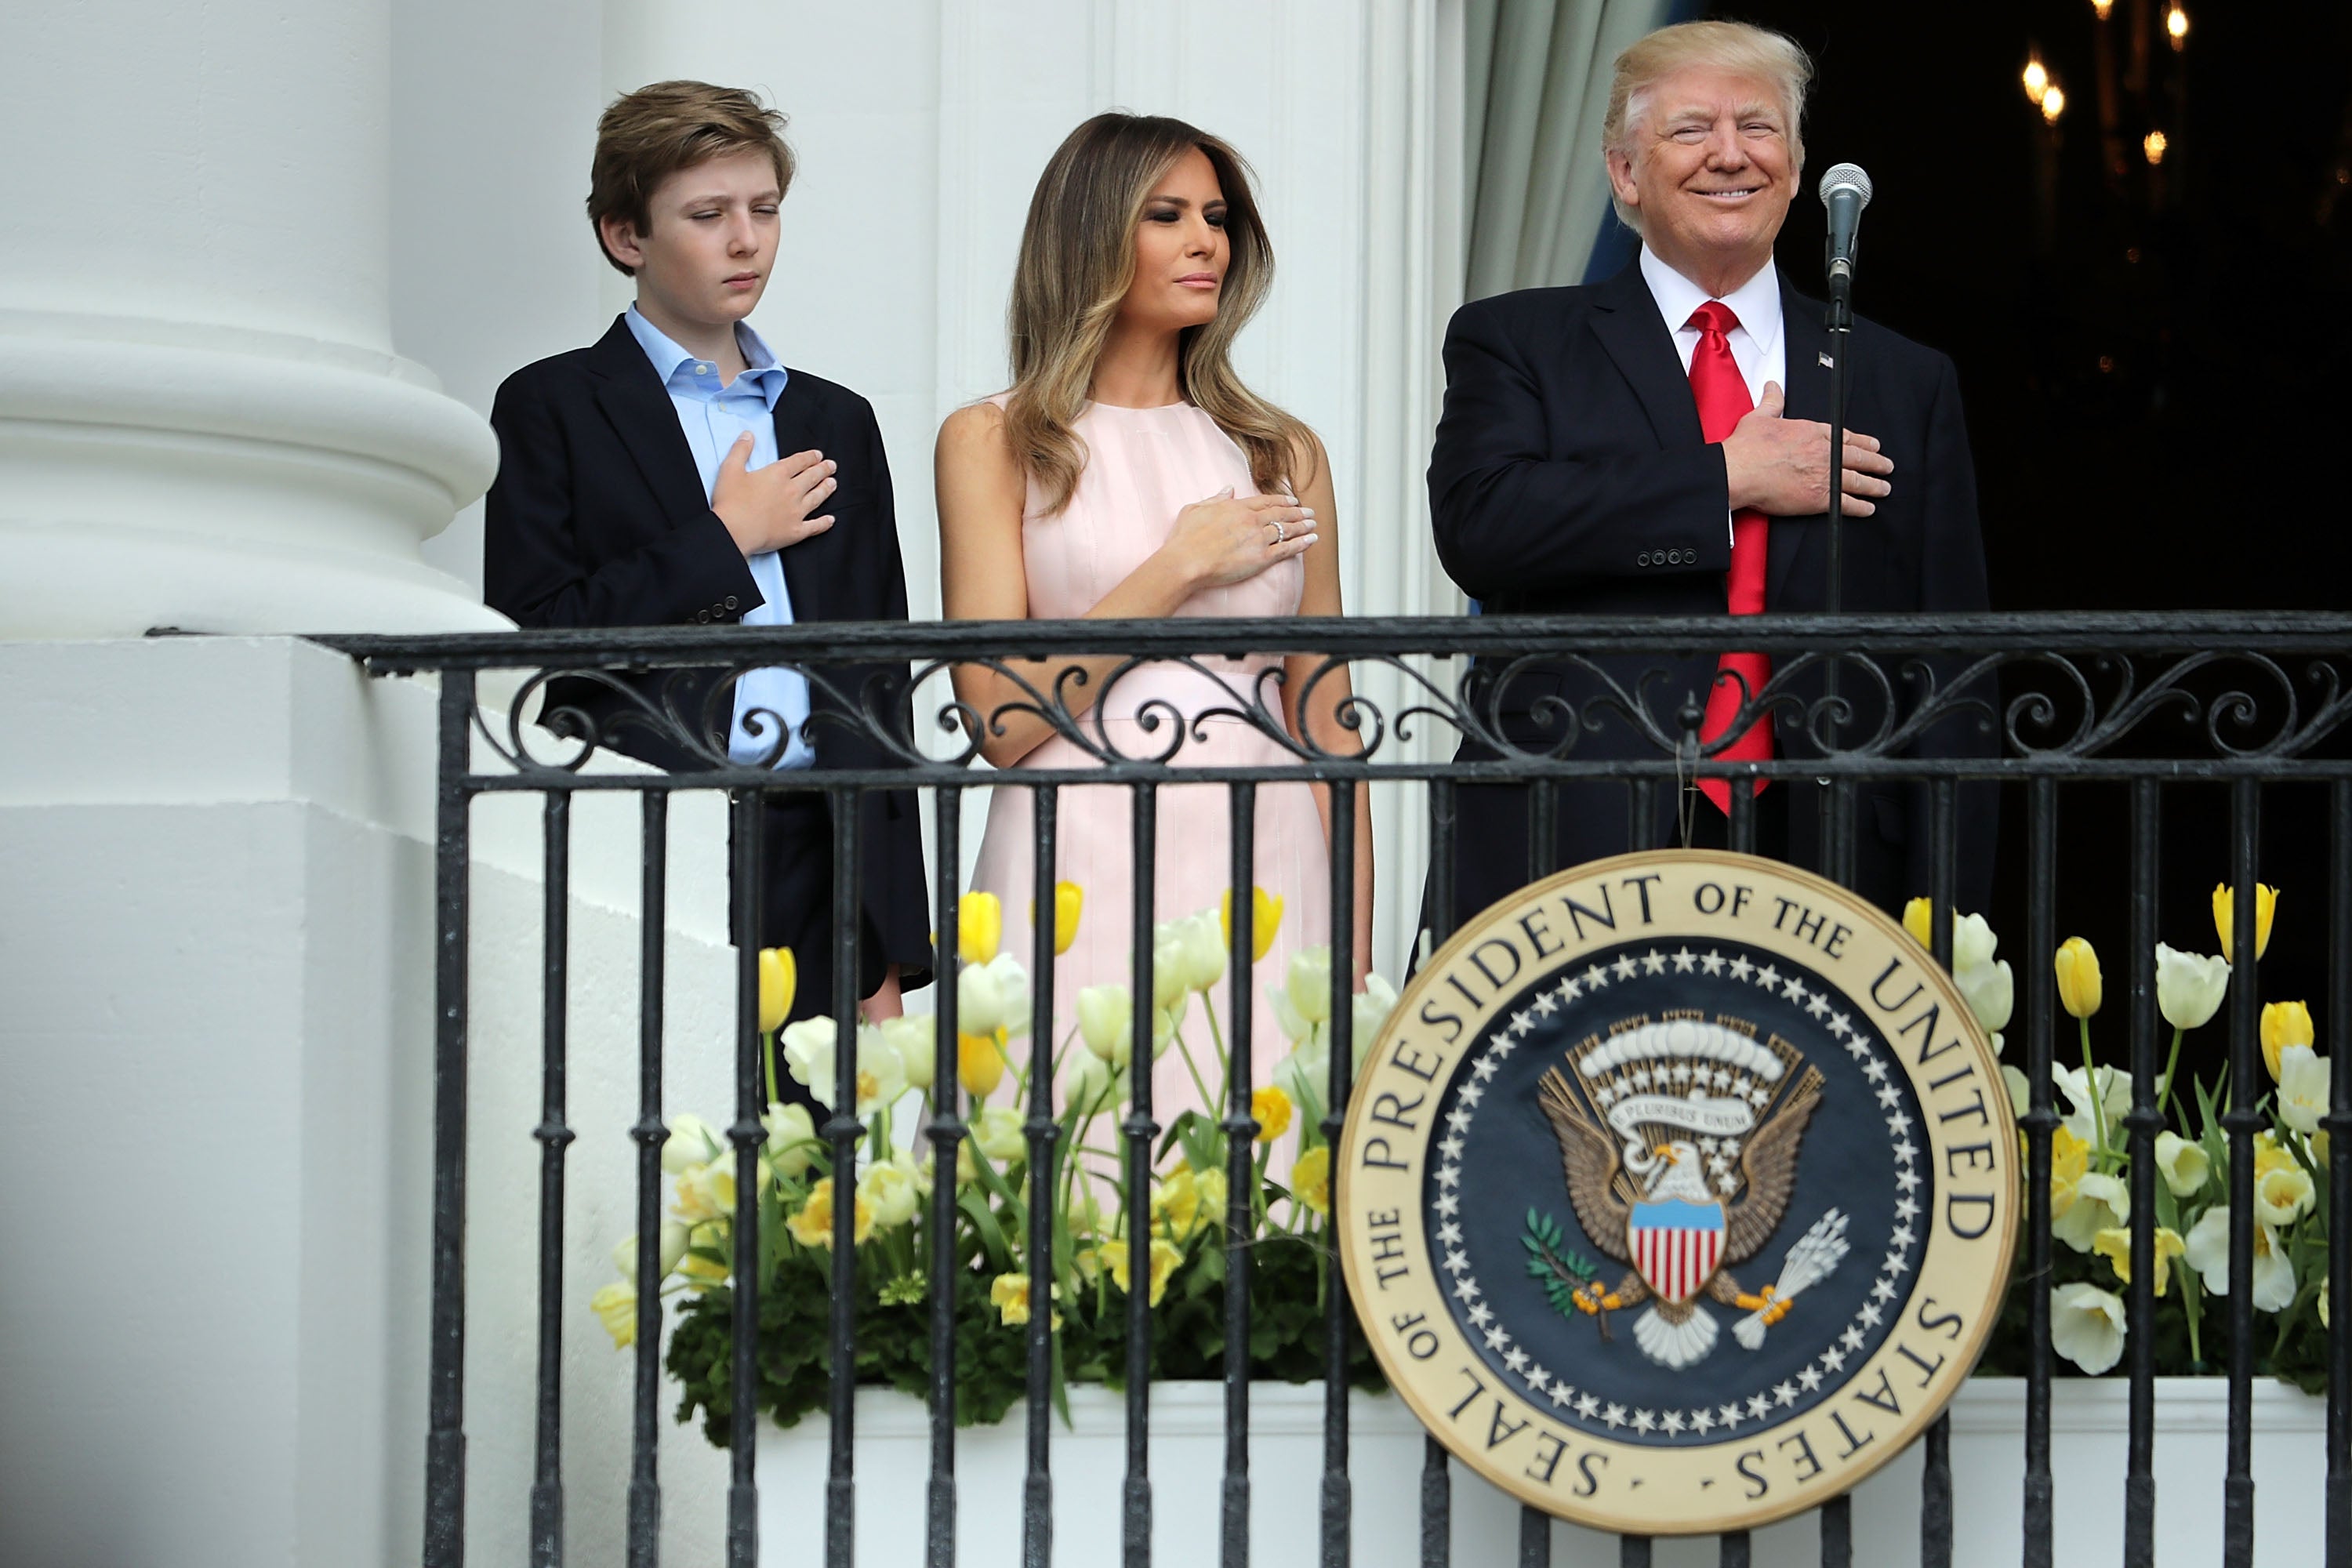 Watch The Moment Melania Trump Had To Remind Her President Husband To Properly Stand For The National Anthem